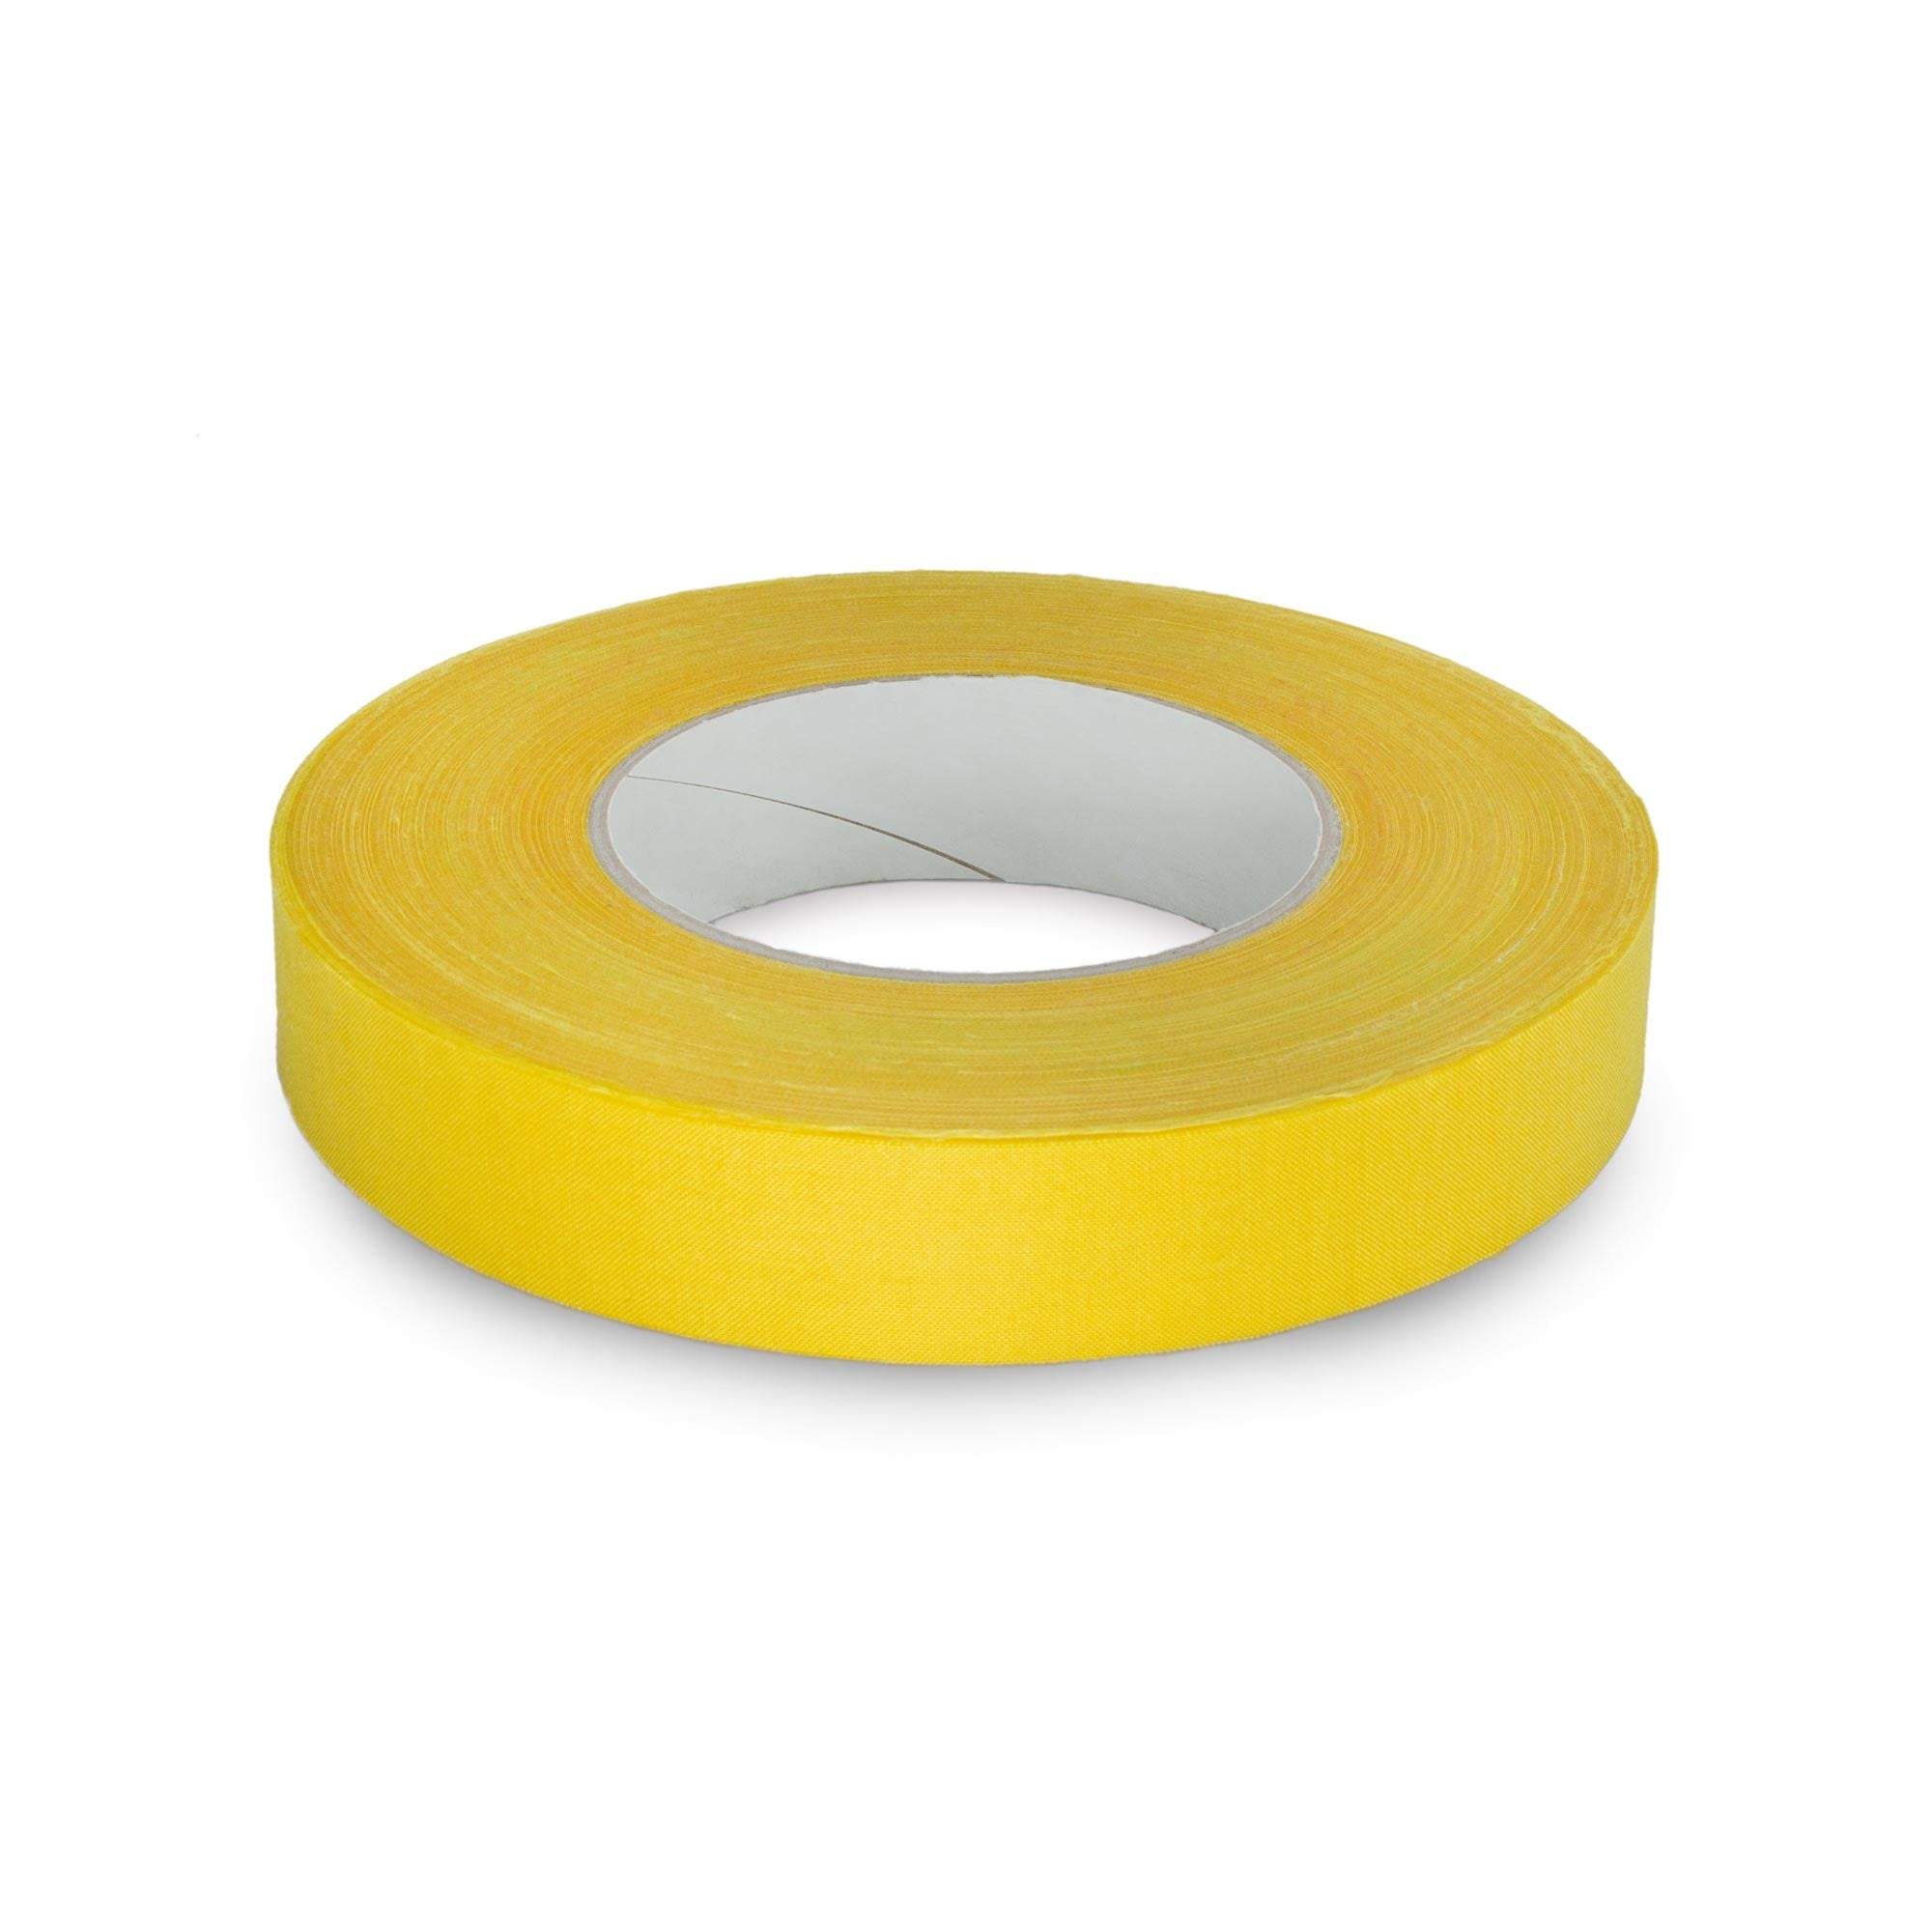 unpackaged yellow 2.5cm wide tape